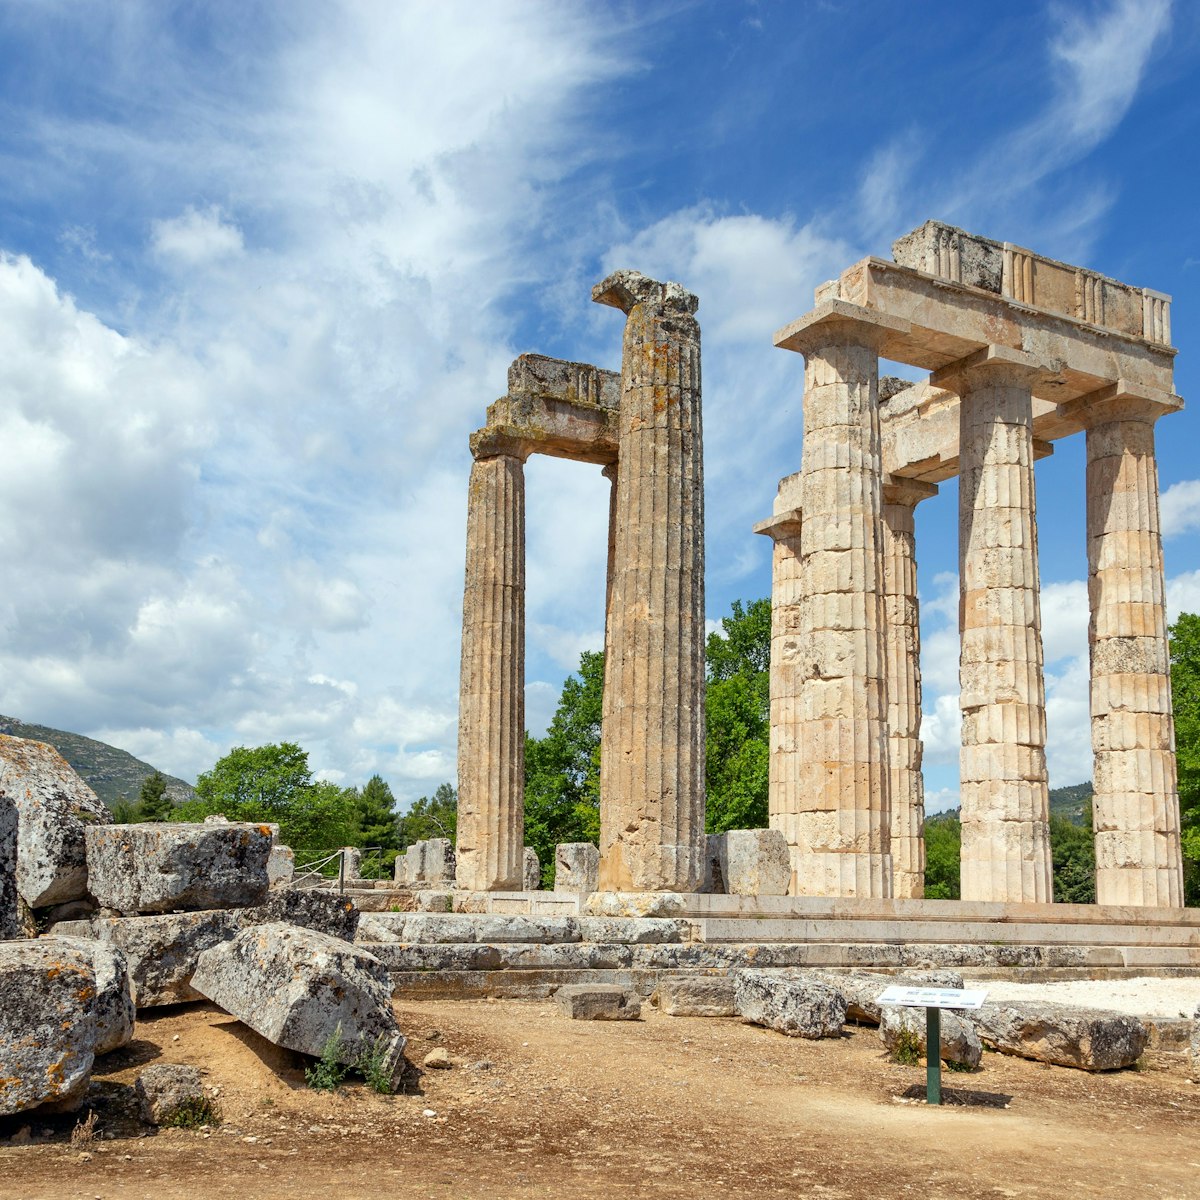 The Temple of Zeus built around 330 BC is a Doric peripteral temple consisting of 32 limestone outer columns (6 by 12 columns) and the construction is unusual as it included all three Greek architectural forms, the Doric, the Corinthian, and the Ionic.